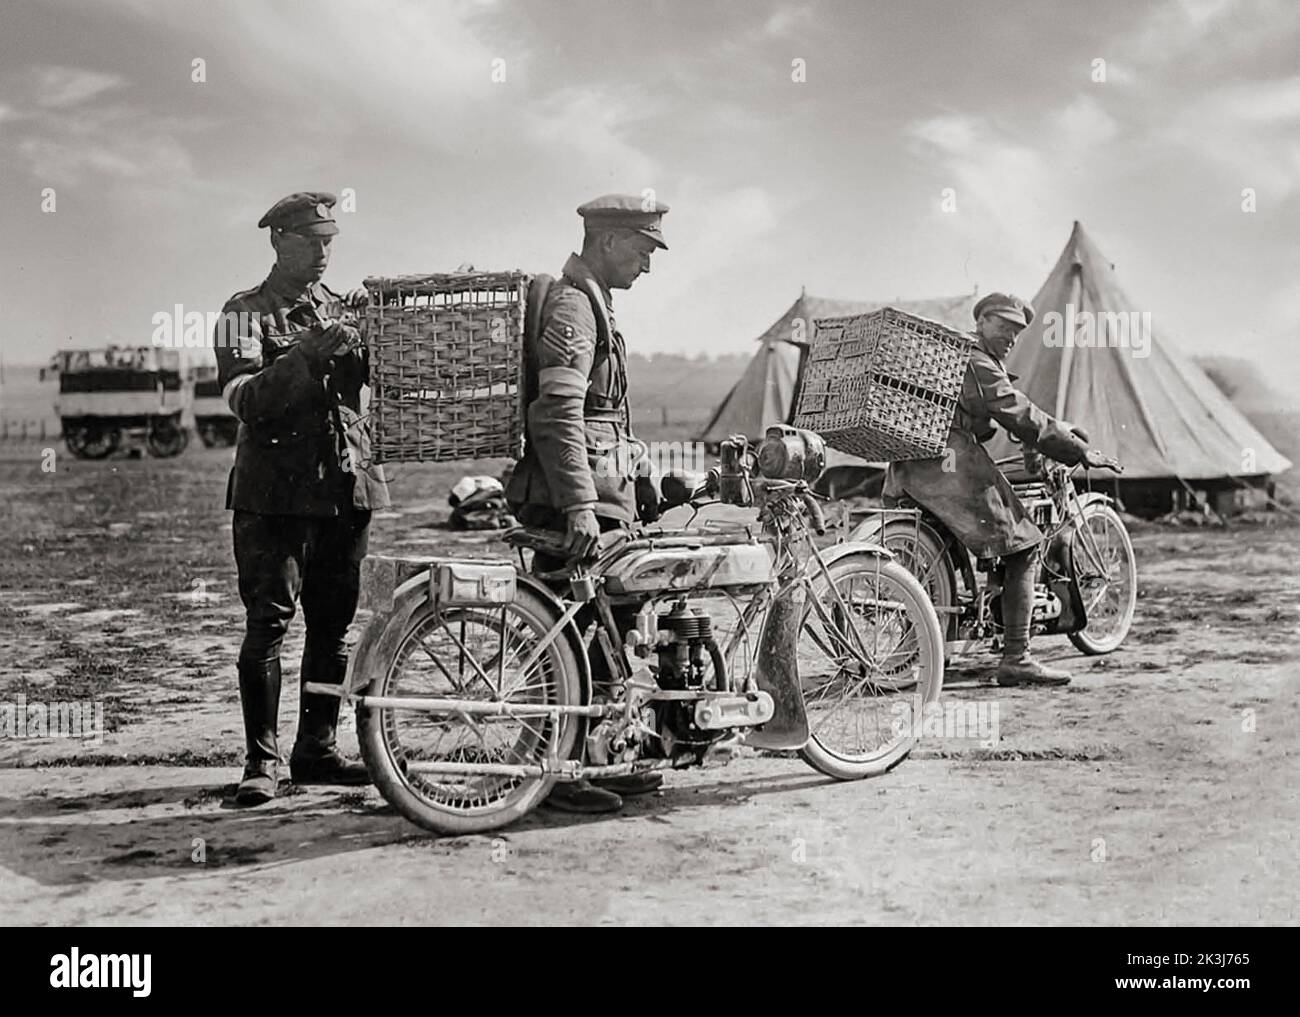 World War One military homing pigeons acted as efficient messengers and dispatch bearers not only from division to division and from the trenches to the rear. Here two soldiers with motorbikes, each with a wicker basket strapped to his back. A third man is putting a pigeon in one of the baskets. In the background there are two mobile pigeon lofts Stock Photo